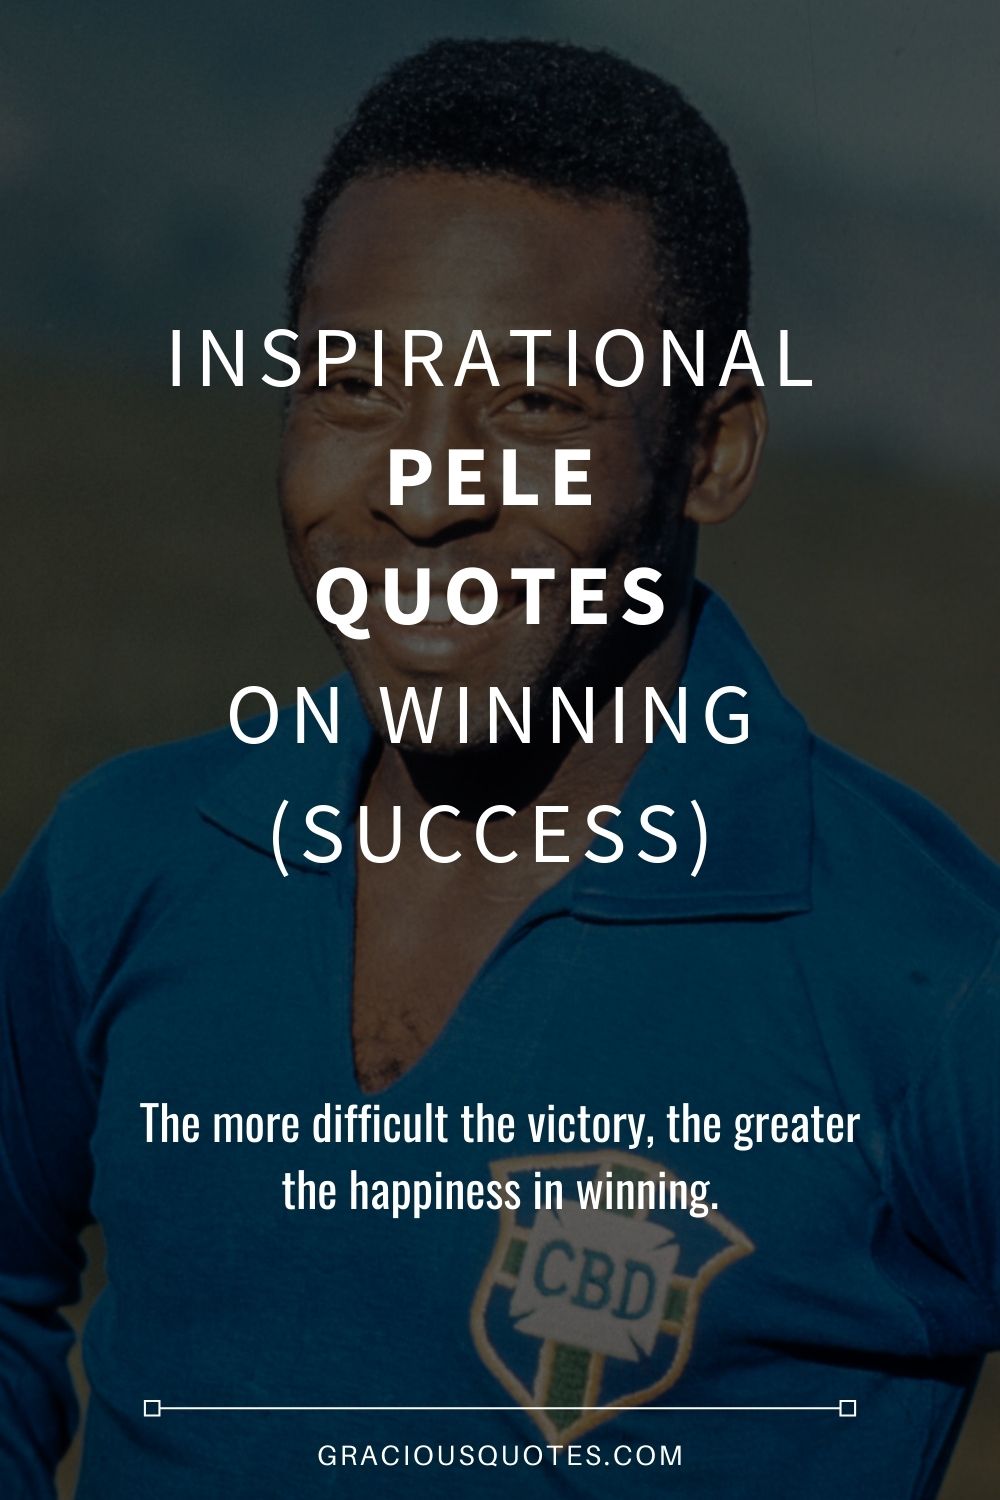 Inspirational Pele Quotes on Winning (SUCCESS) - Gracious Quotes